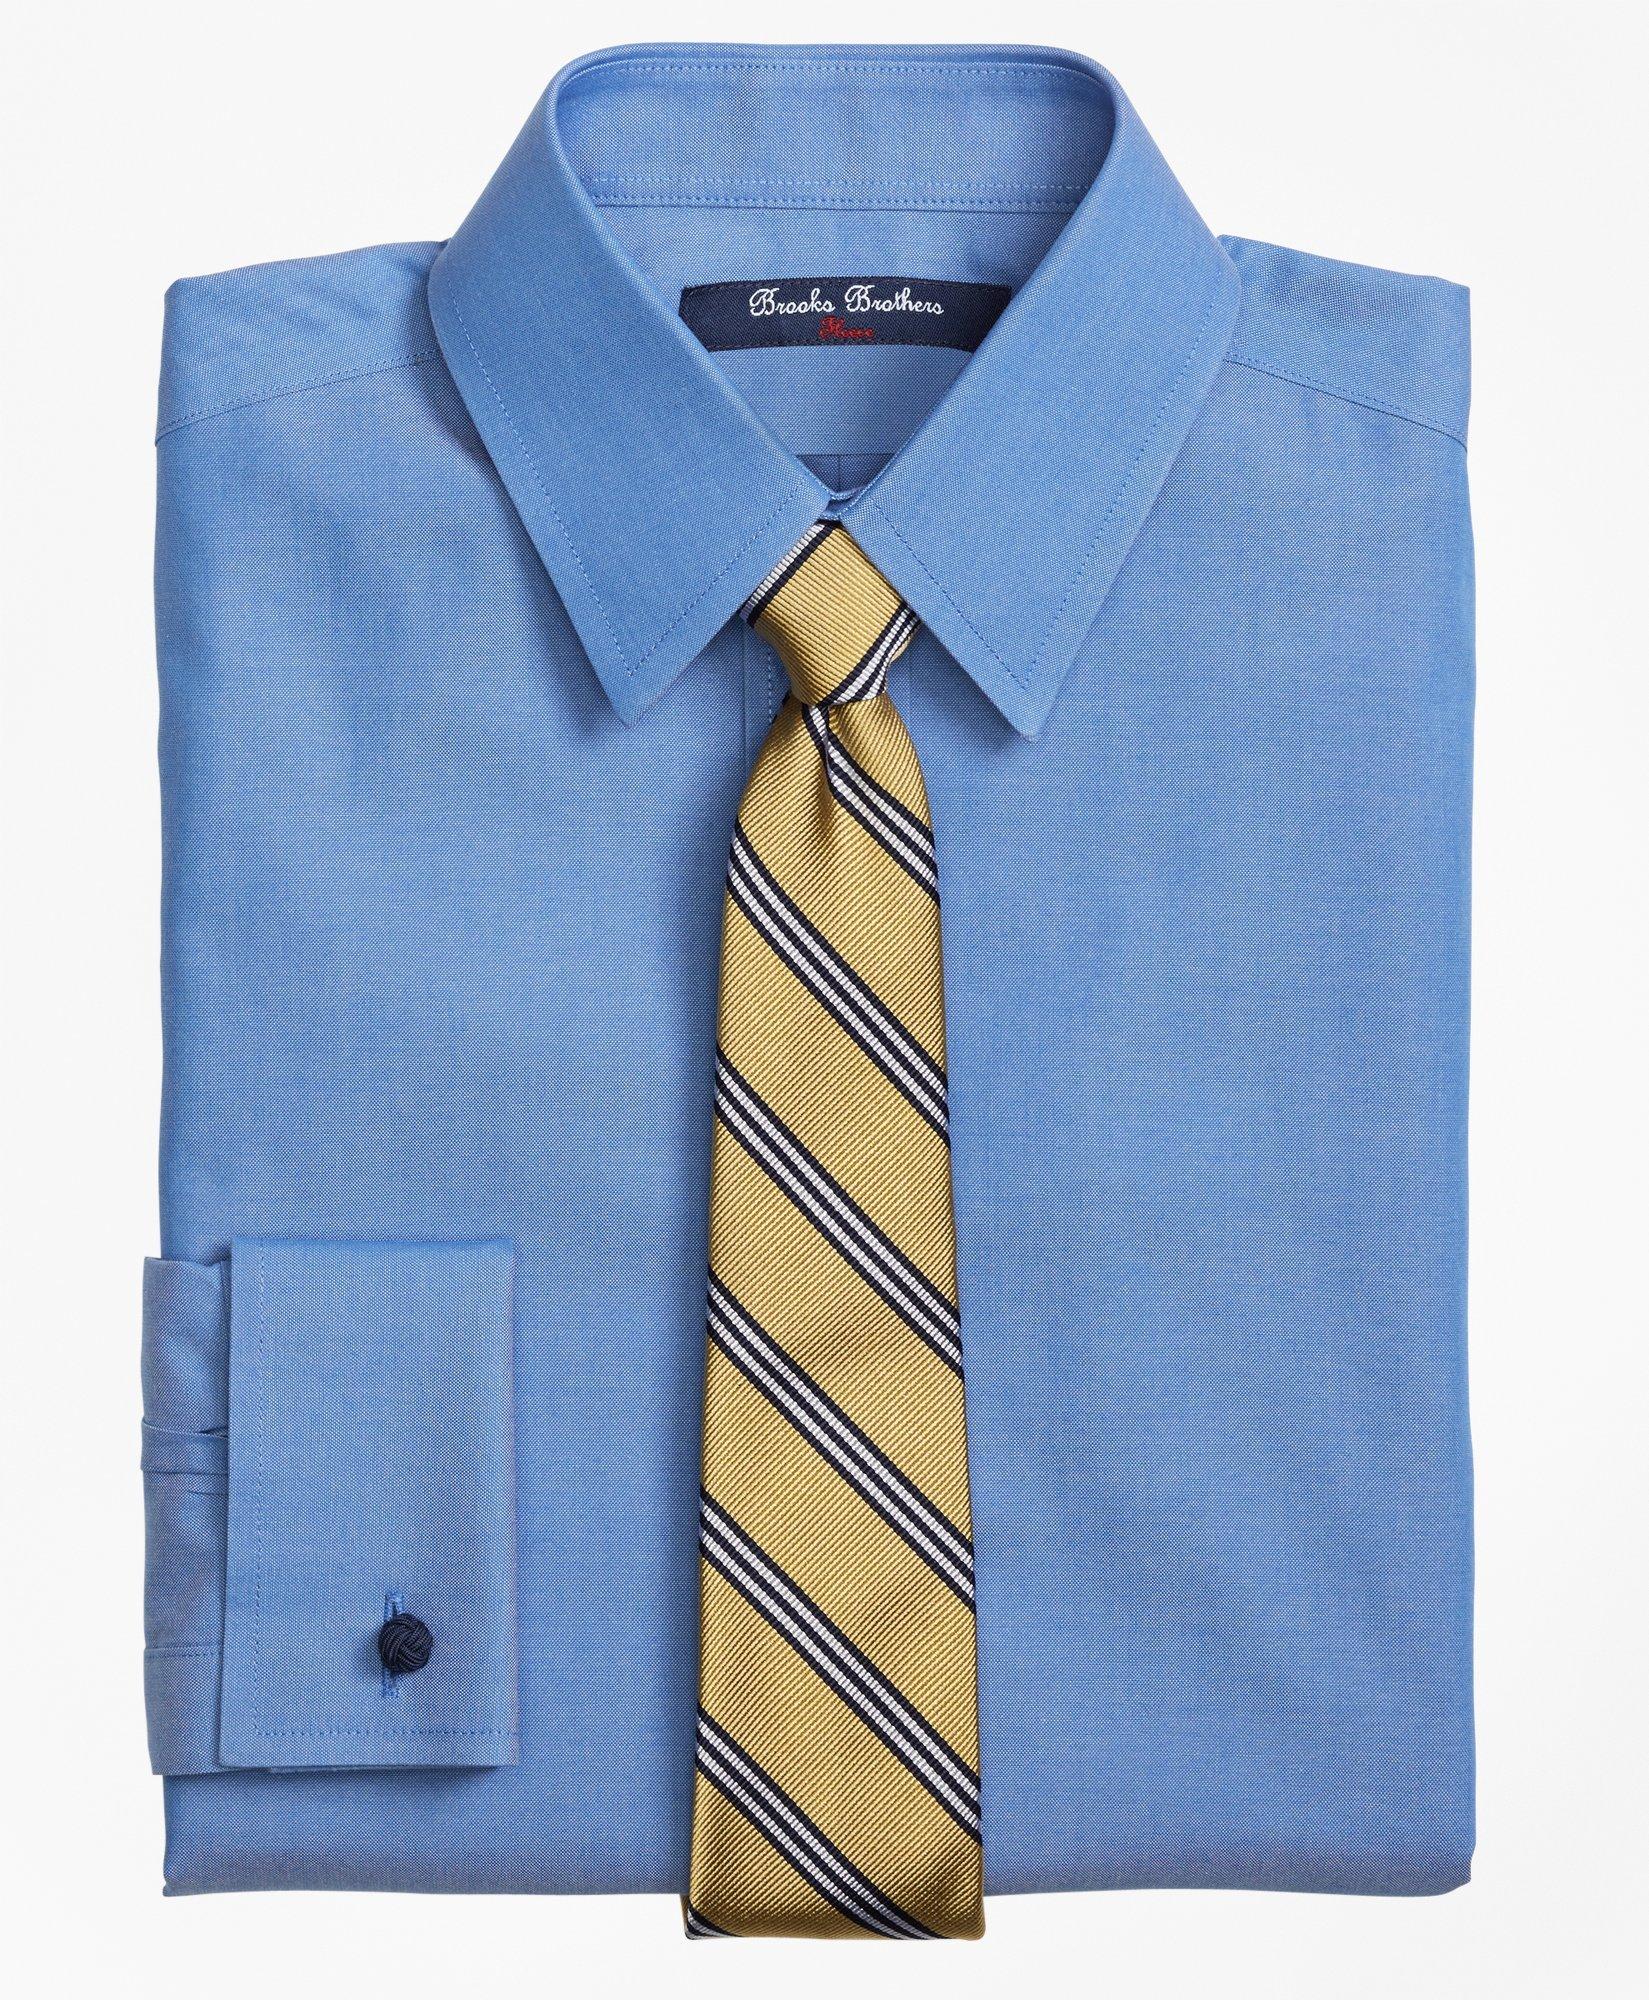 Boys' Non-Iron Pinpoint Cotton French Cuff Dress Shirt | Brooks Brothers